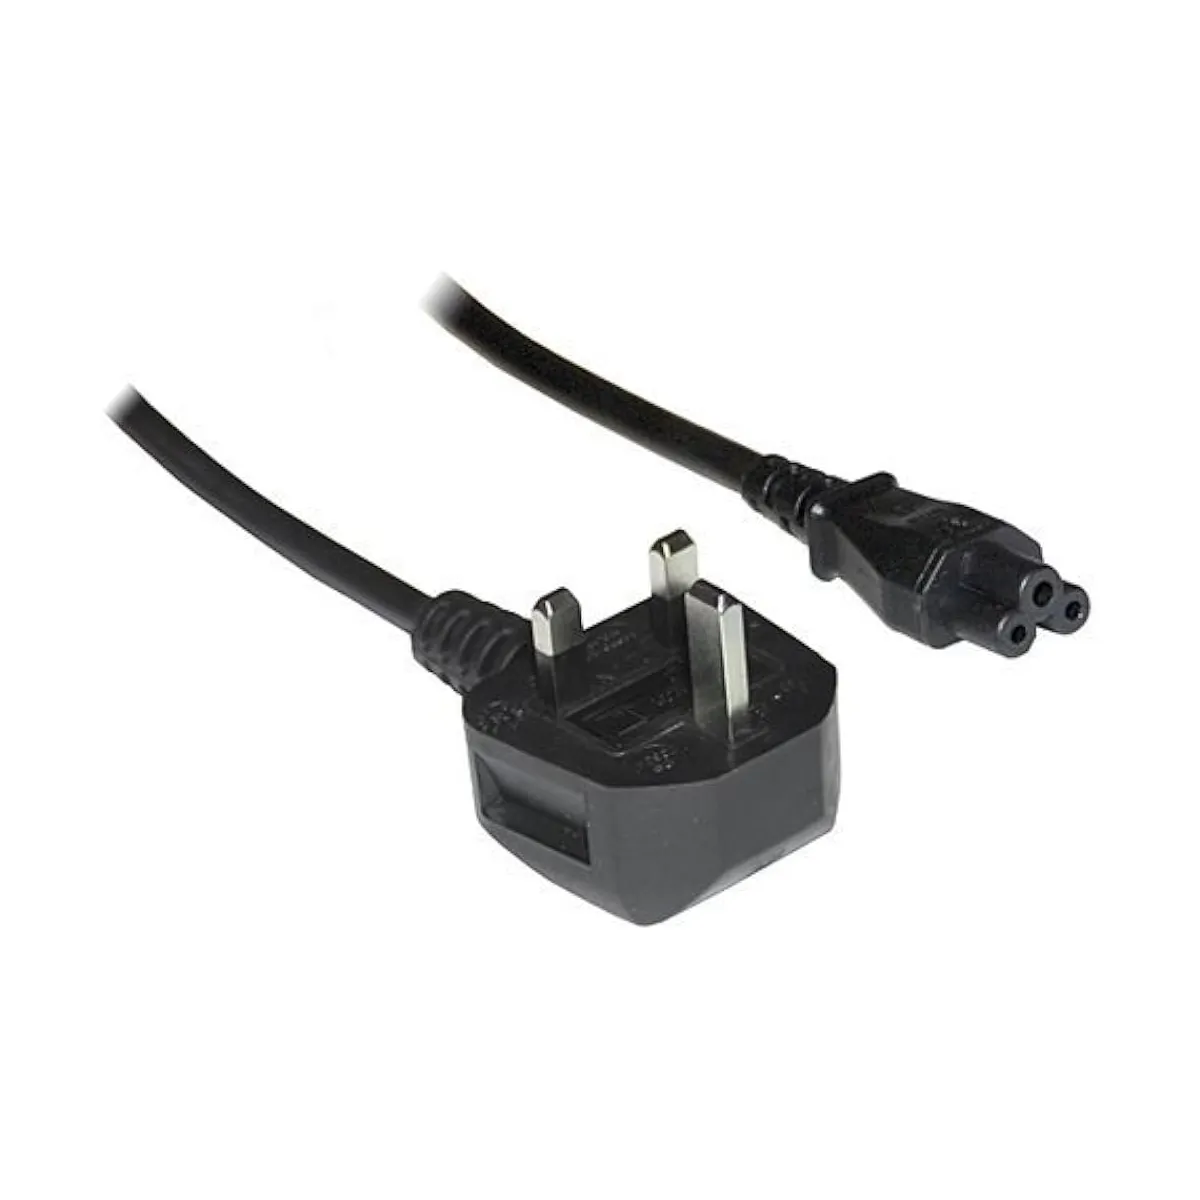 UK Mains to C5 Power Cable